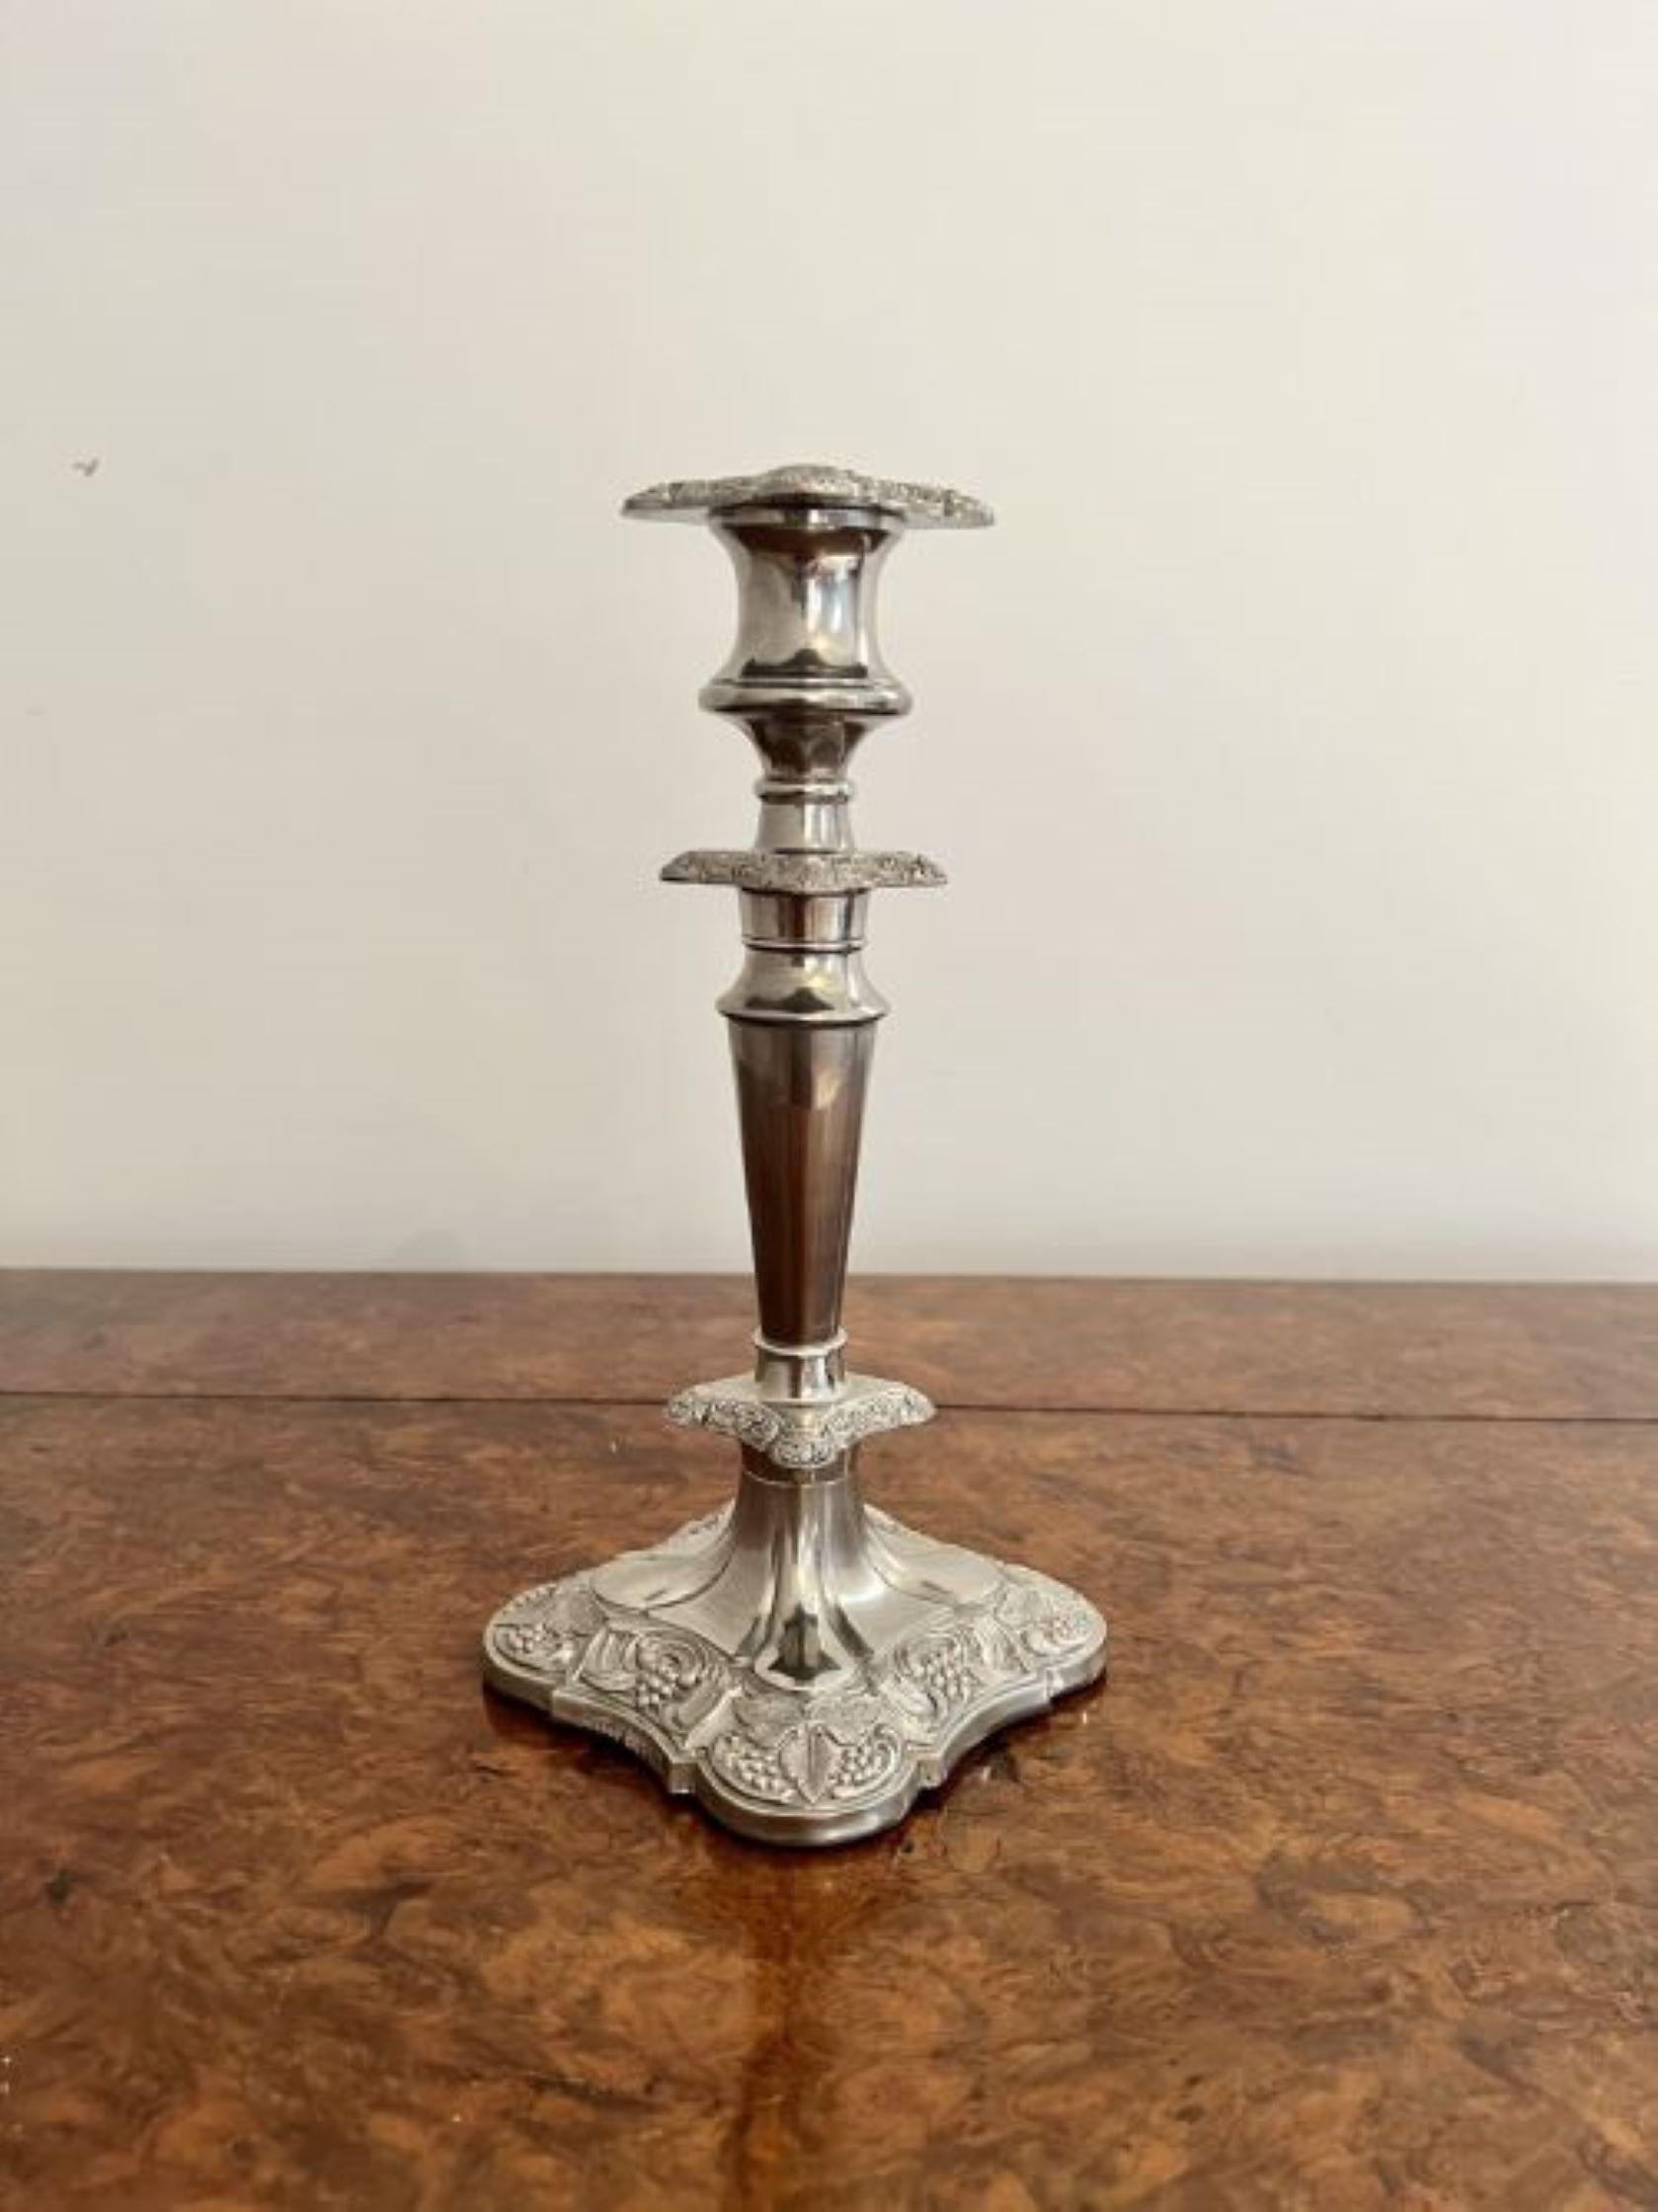 Fine quality antique Edwardian ornate silver plated candelabra and candlesticks set having a fine quality antique Edwardian silver plated candelabra accompanied by the matching pair of candlesticks, the candelabra having three light branches, ornate